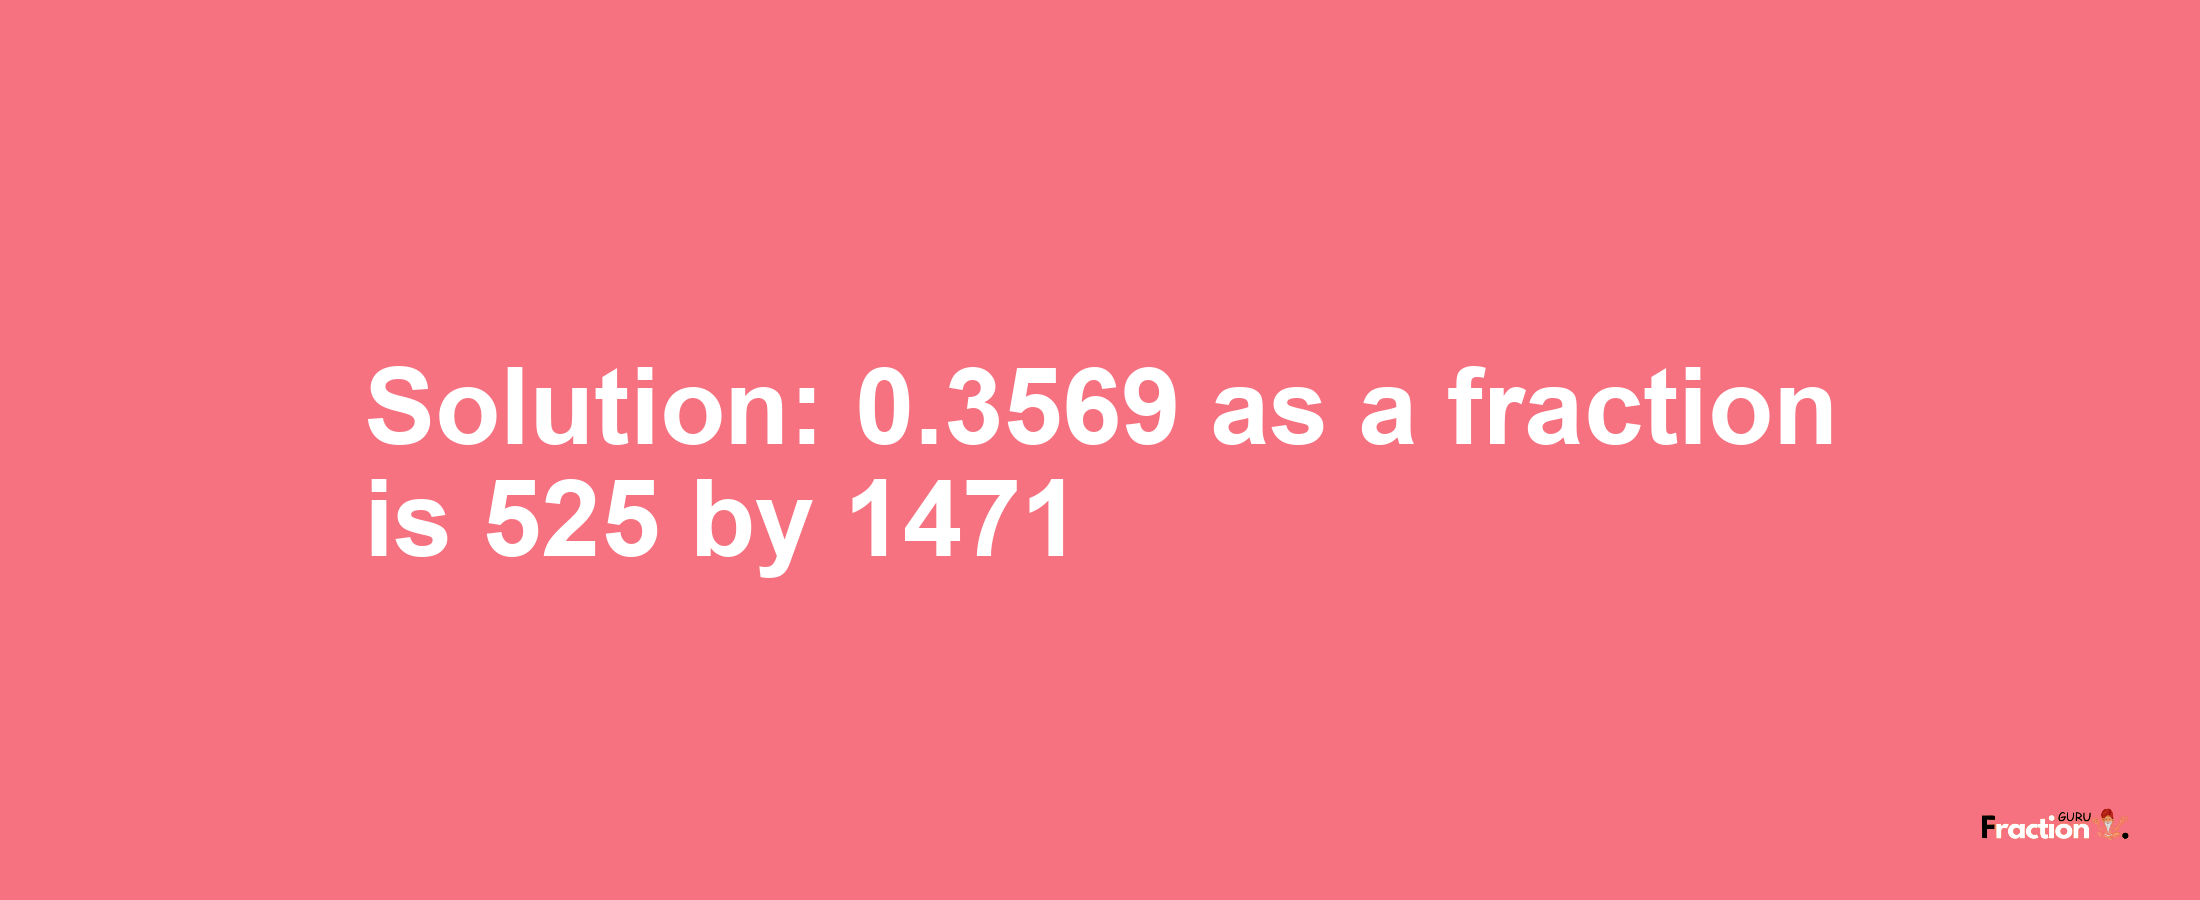 Solution:0.3569 as a fraction is 525/1471